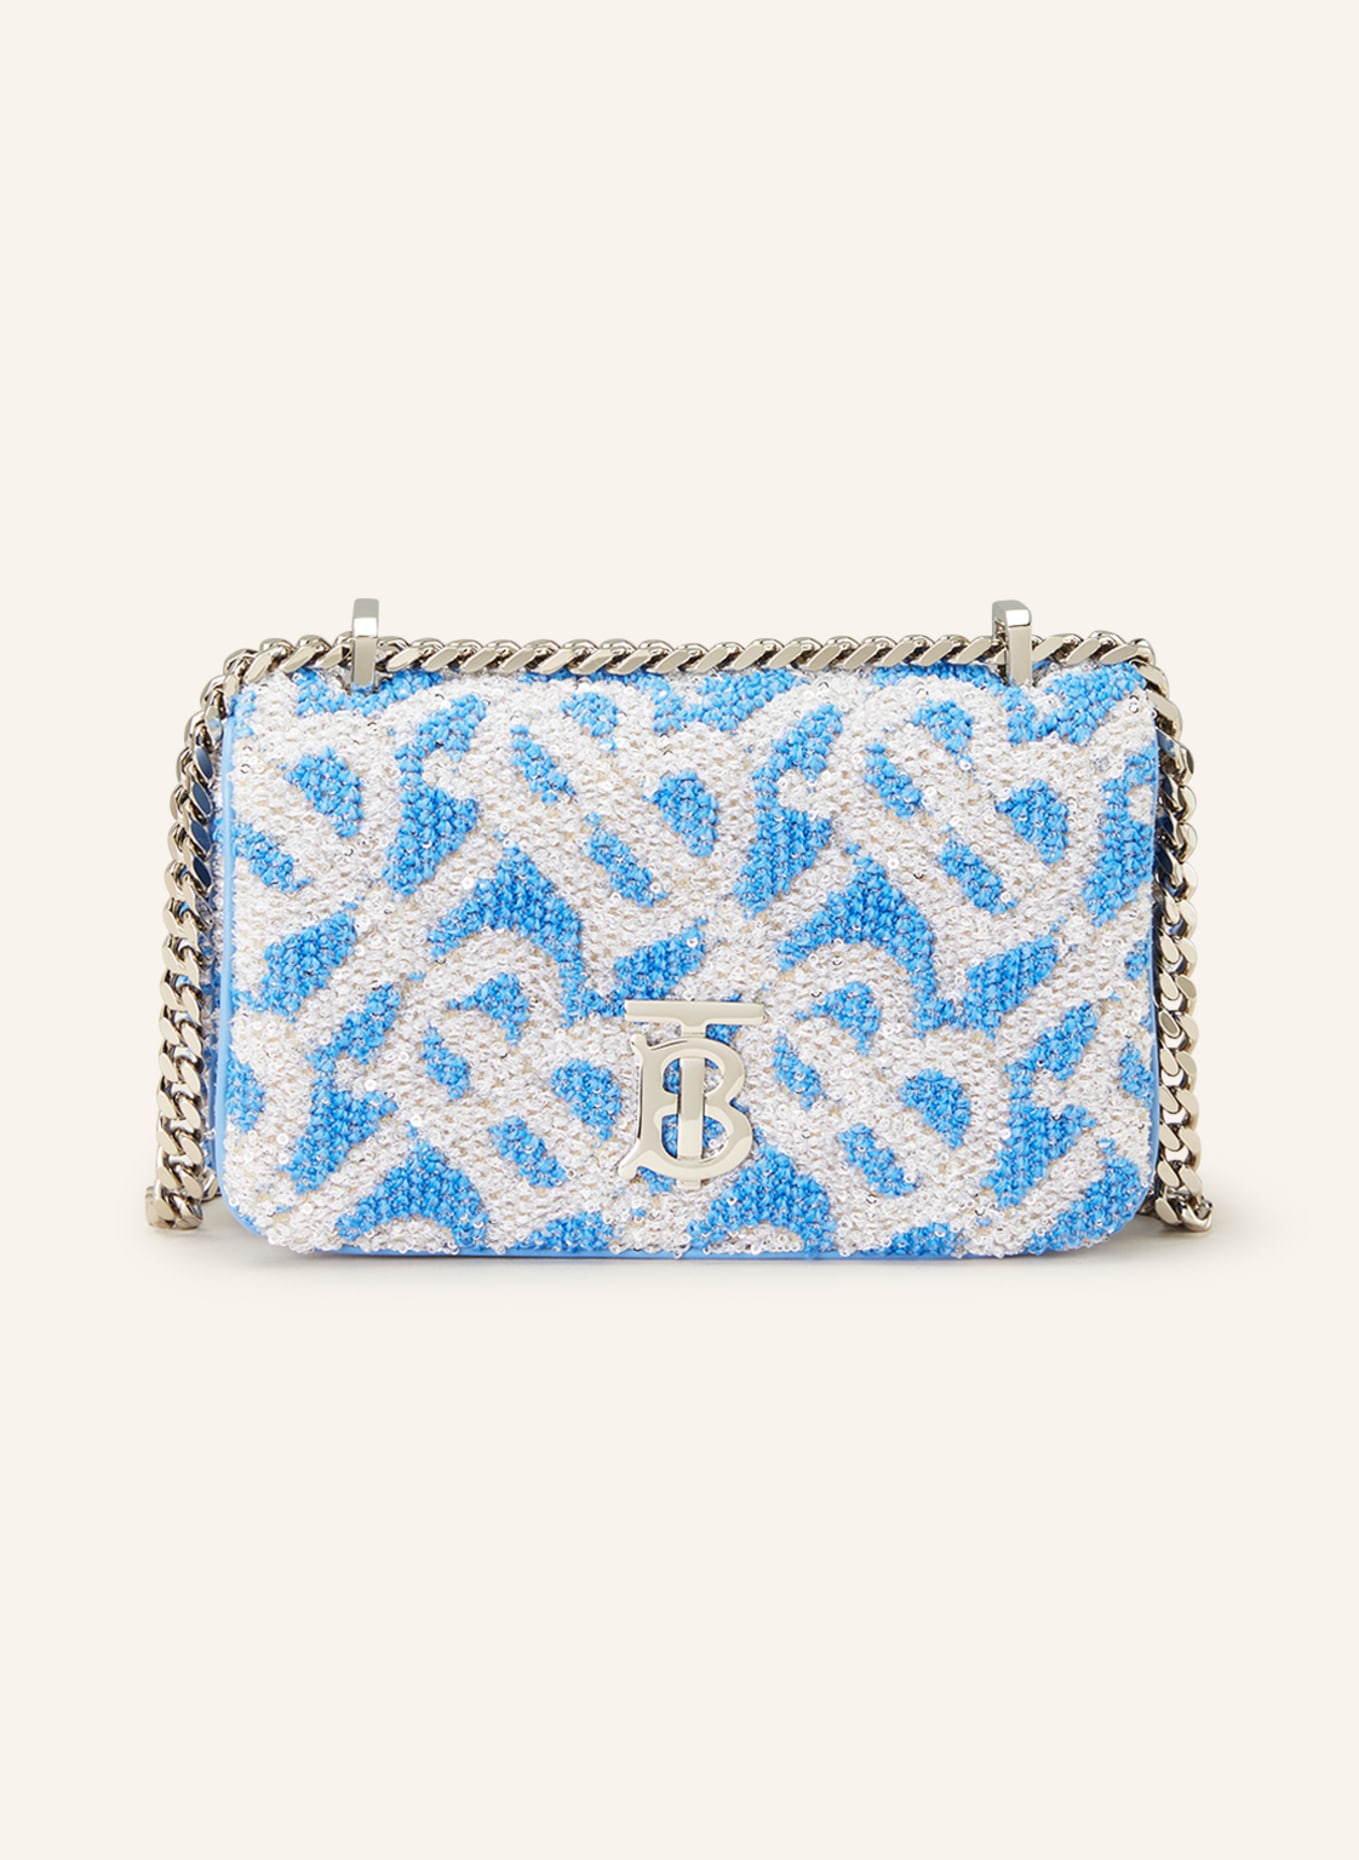 BURBERRY Crossbody bag LOLA with sequins, Color: BLUE/ SILVER/ GRAY (Image 1)